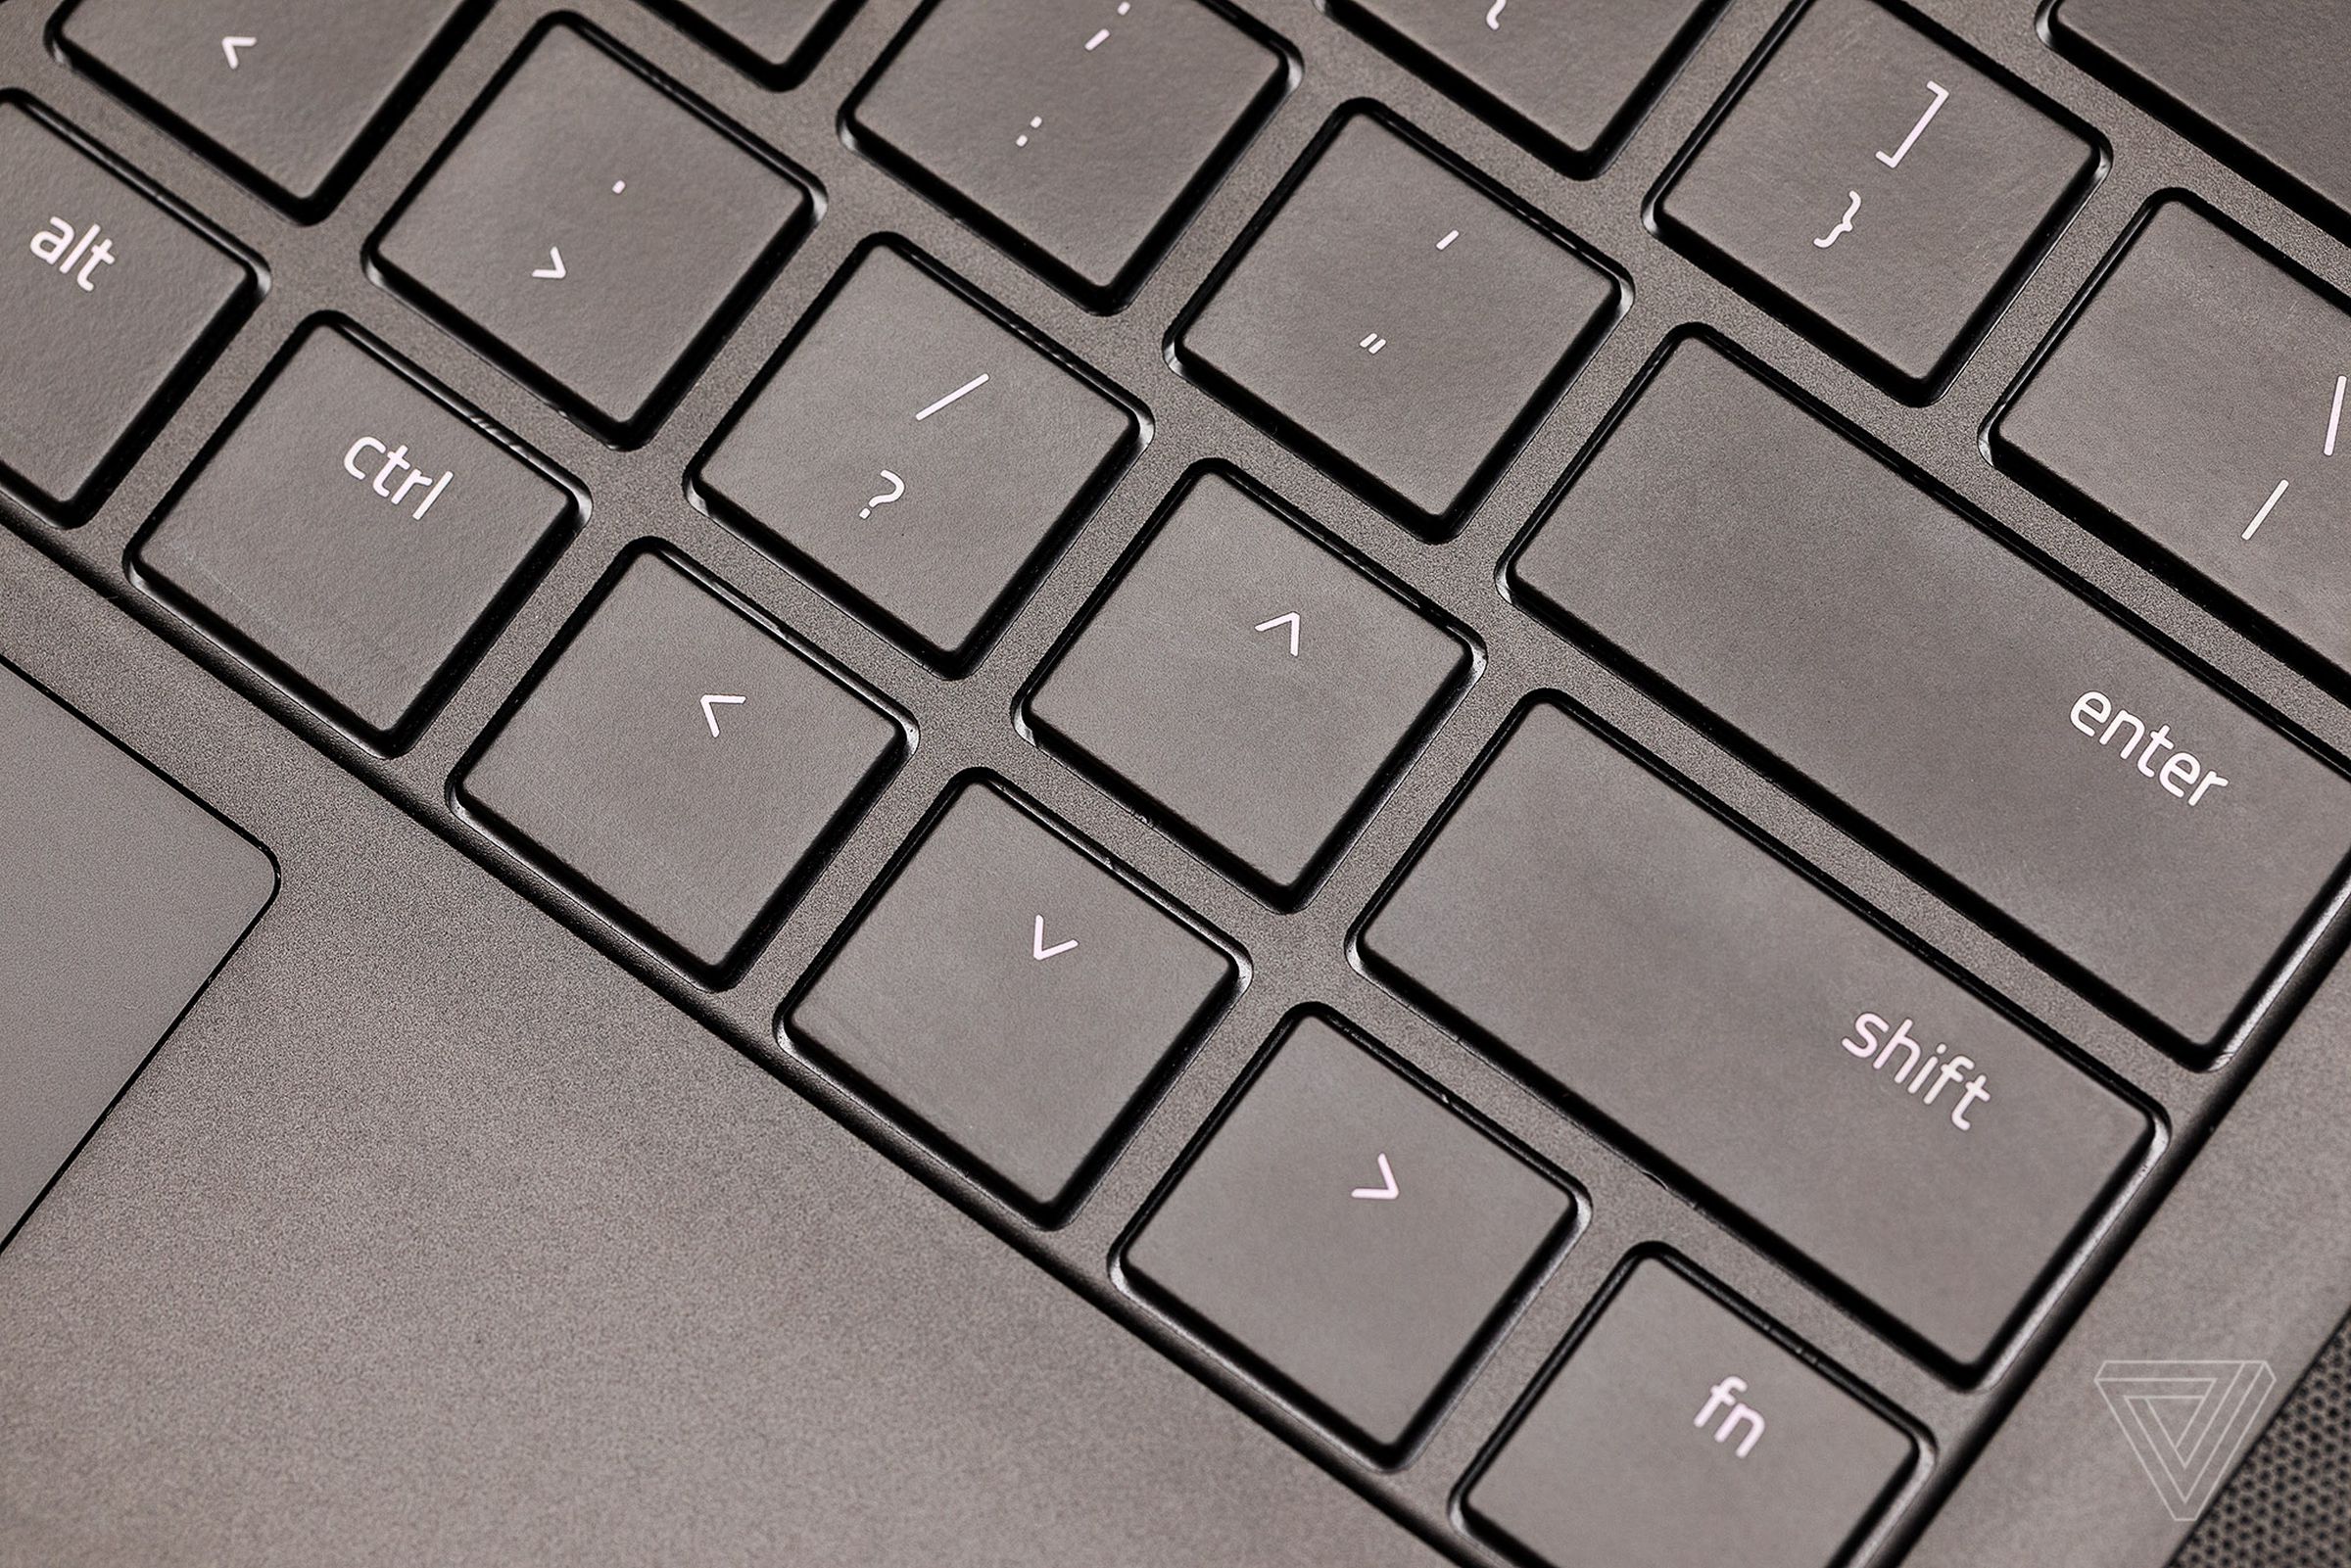 Here’s the scene of the crime: the up arrow is heinously wedged between the forward slash and shift keys.